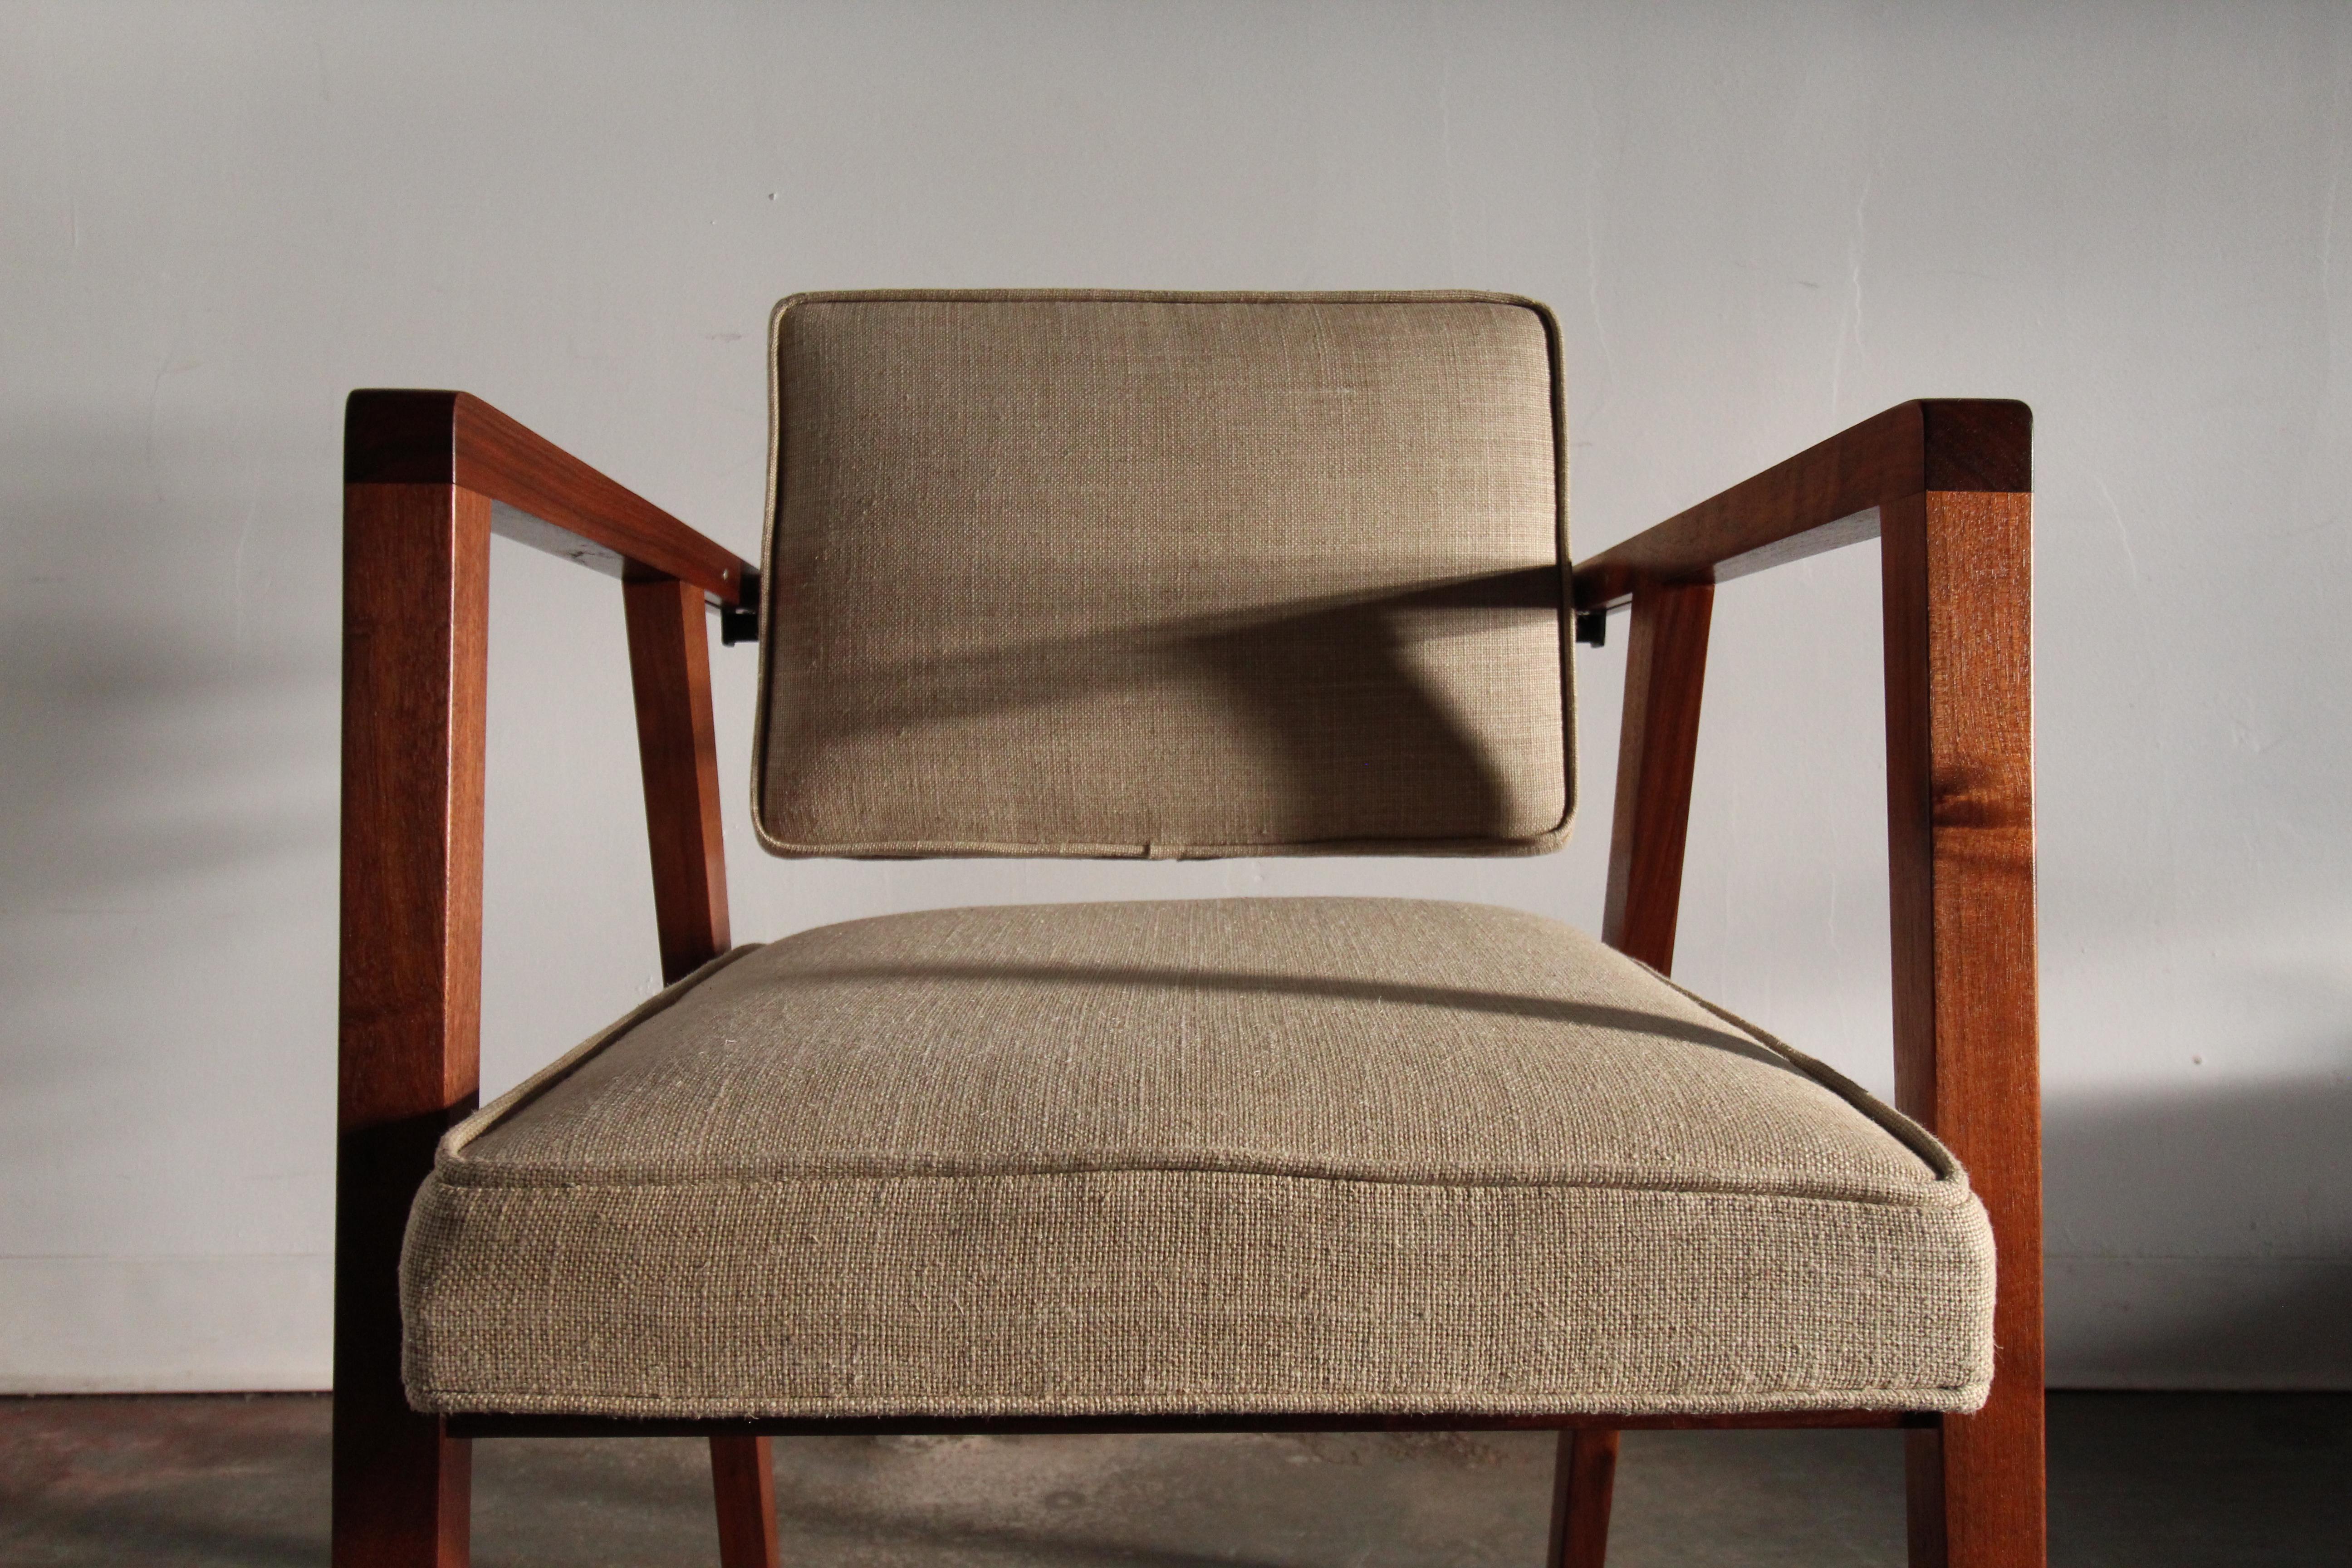 Steel Early Franco Albini for Knoll 'No. 48' Walnut and Linen Accent Chair, 1949 For Sale